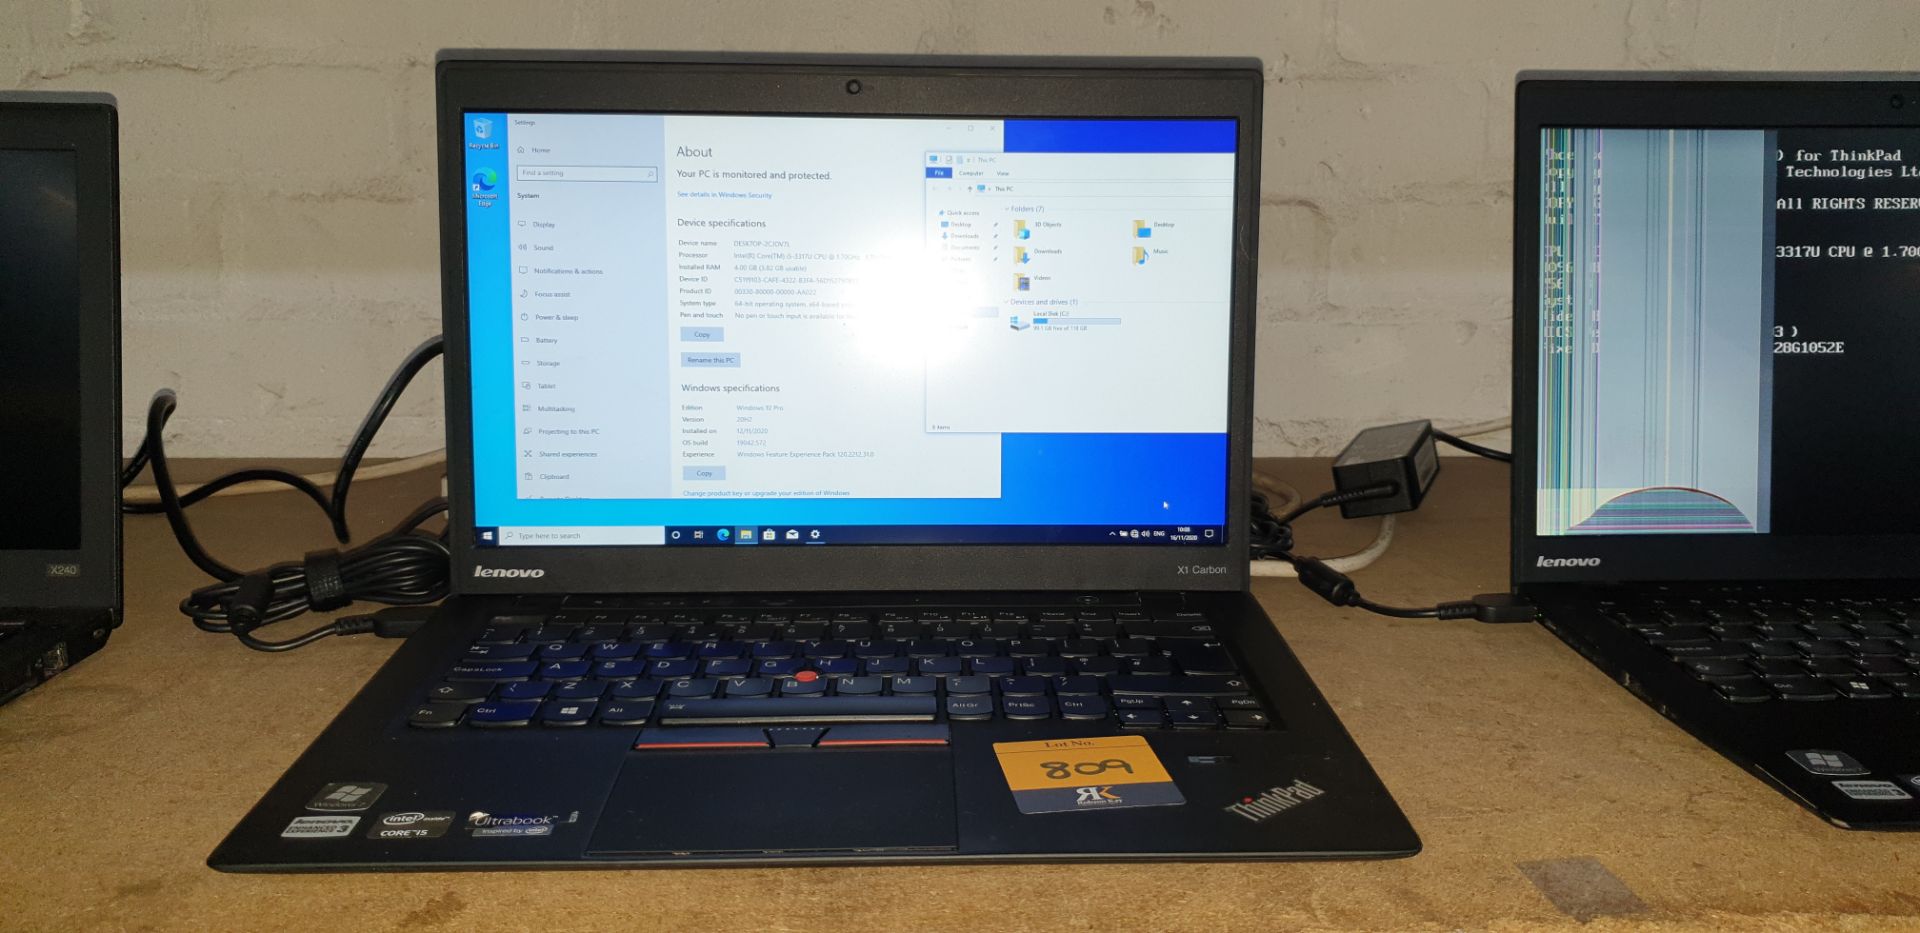 Lenovo notebook Thinkpad X1 Carbon I5-4300, 4Gb, 128Gb SSD, 13.3" Includes charger